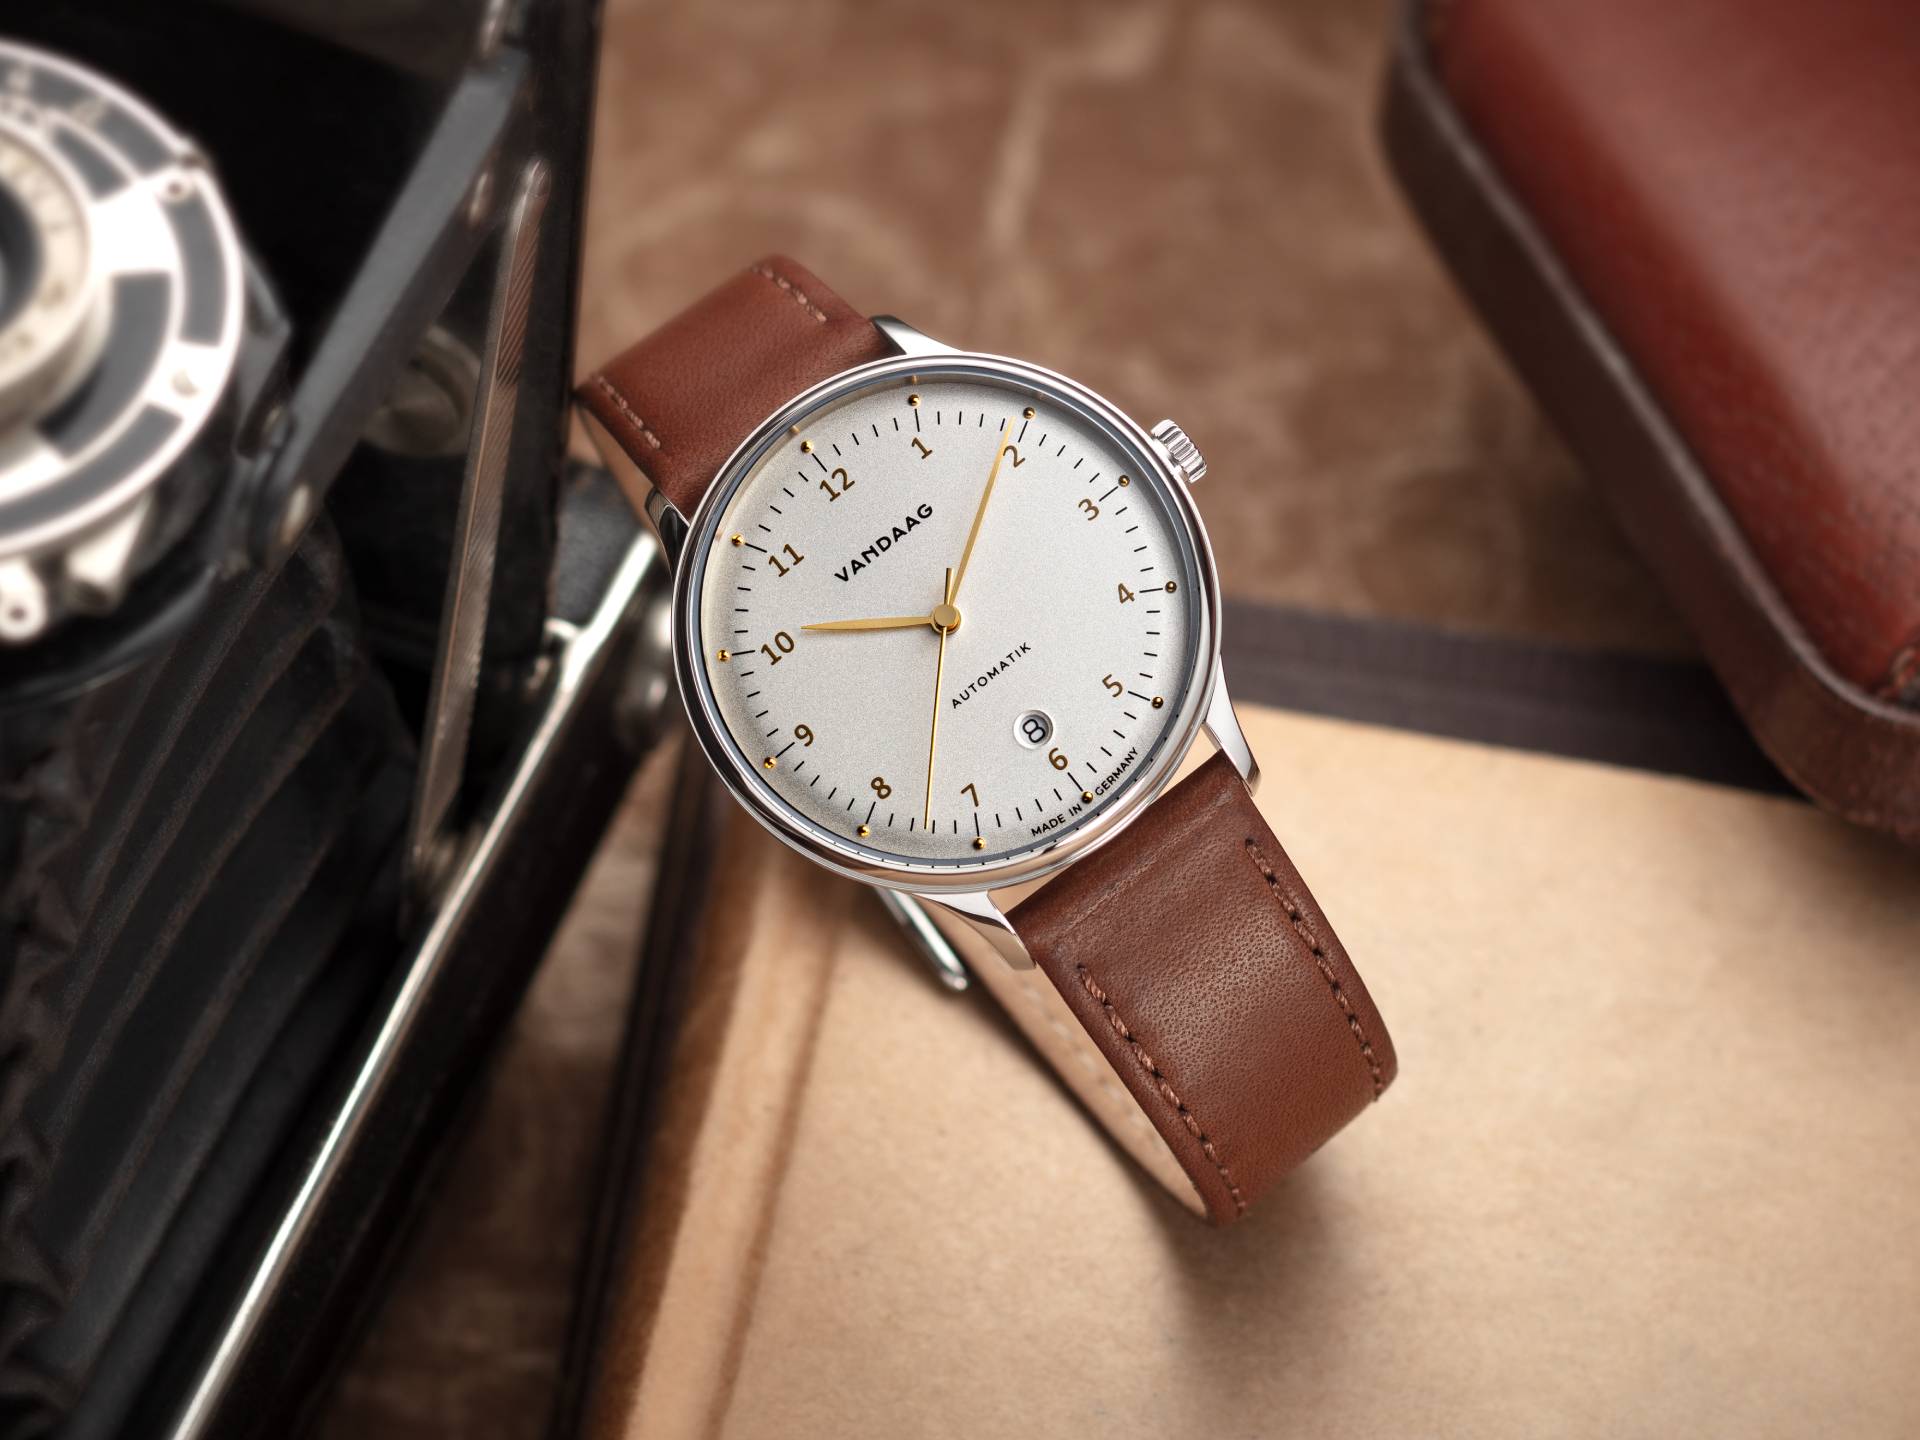 Primus Automatik - Steel-Silver/Gold - light brown leather strap